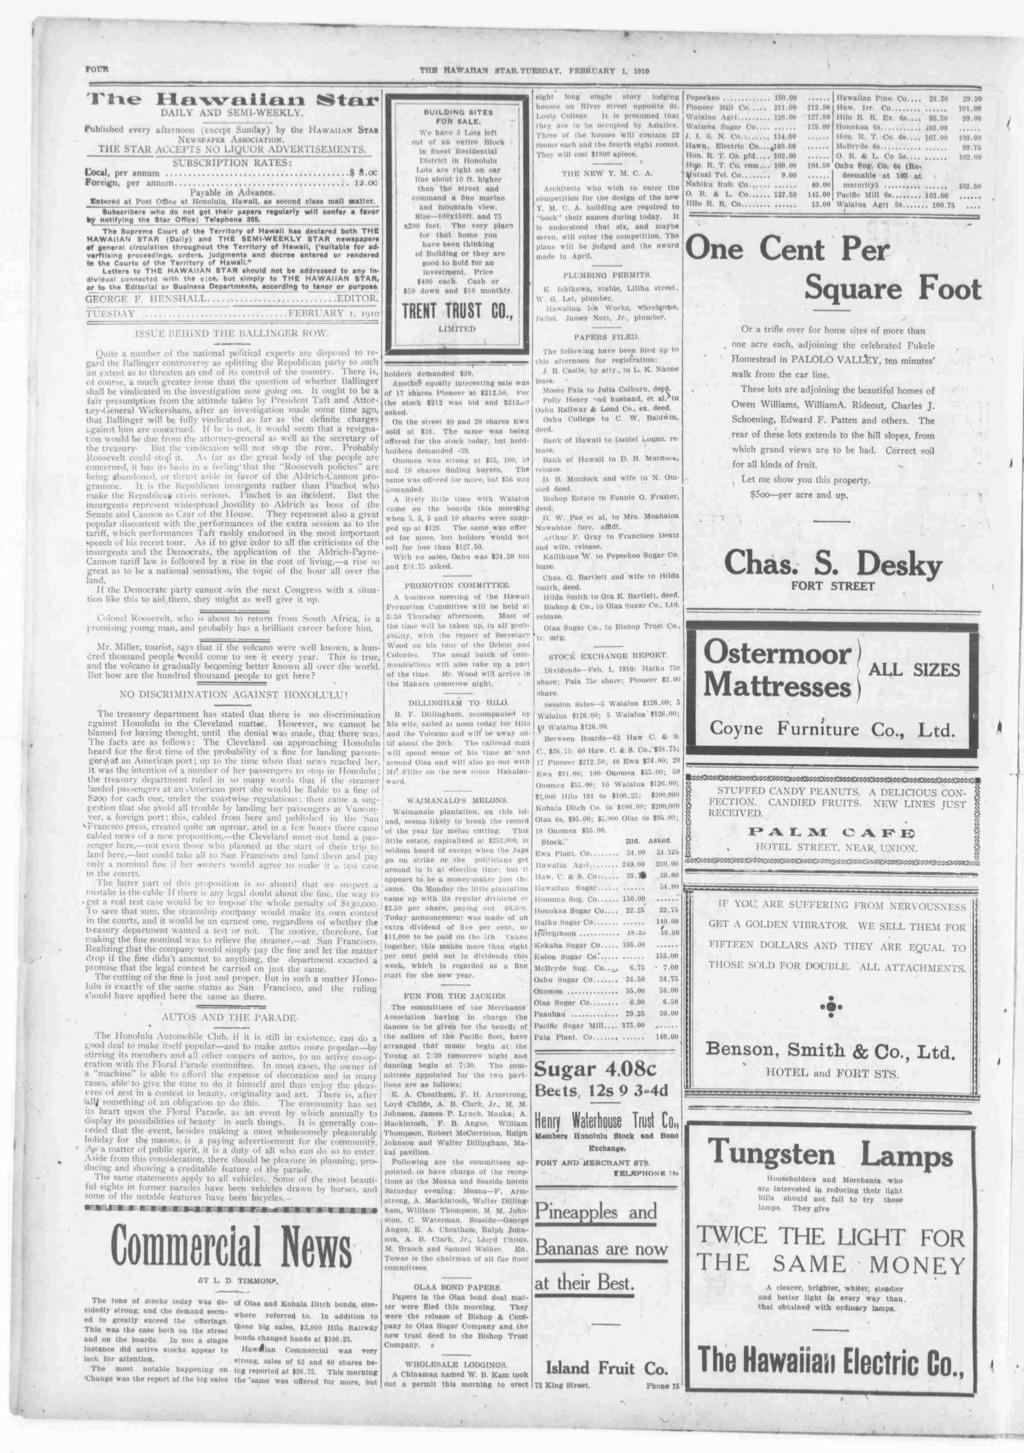 TH3 HAWAAN STAR TUESDAY, FEBRUARY 1, 1910 Sr DALY AND SEM-WEEKLY Publshed every afernoon (excep Sunday) by he Hawaan Sar Newspaper Assocaon - THE STAR ACCEPTS NO LQUOR ADVERTSEMENTS SUBSCRPTON RATES: